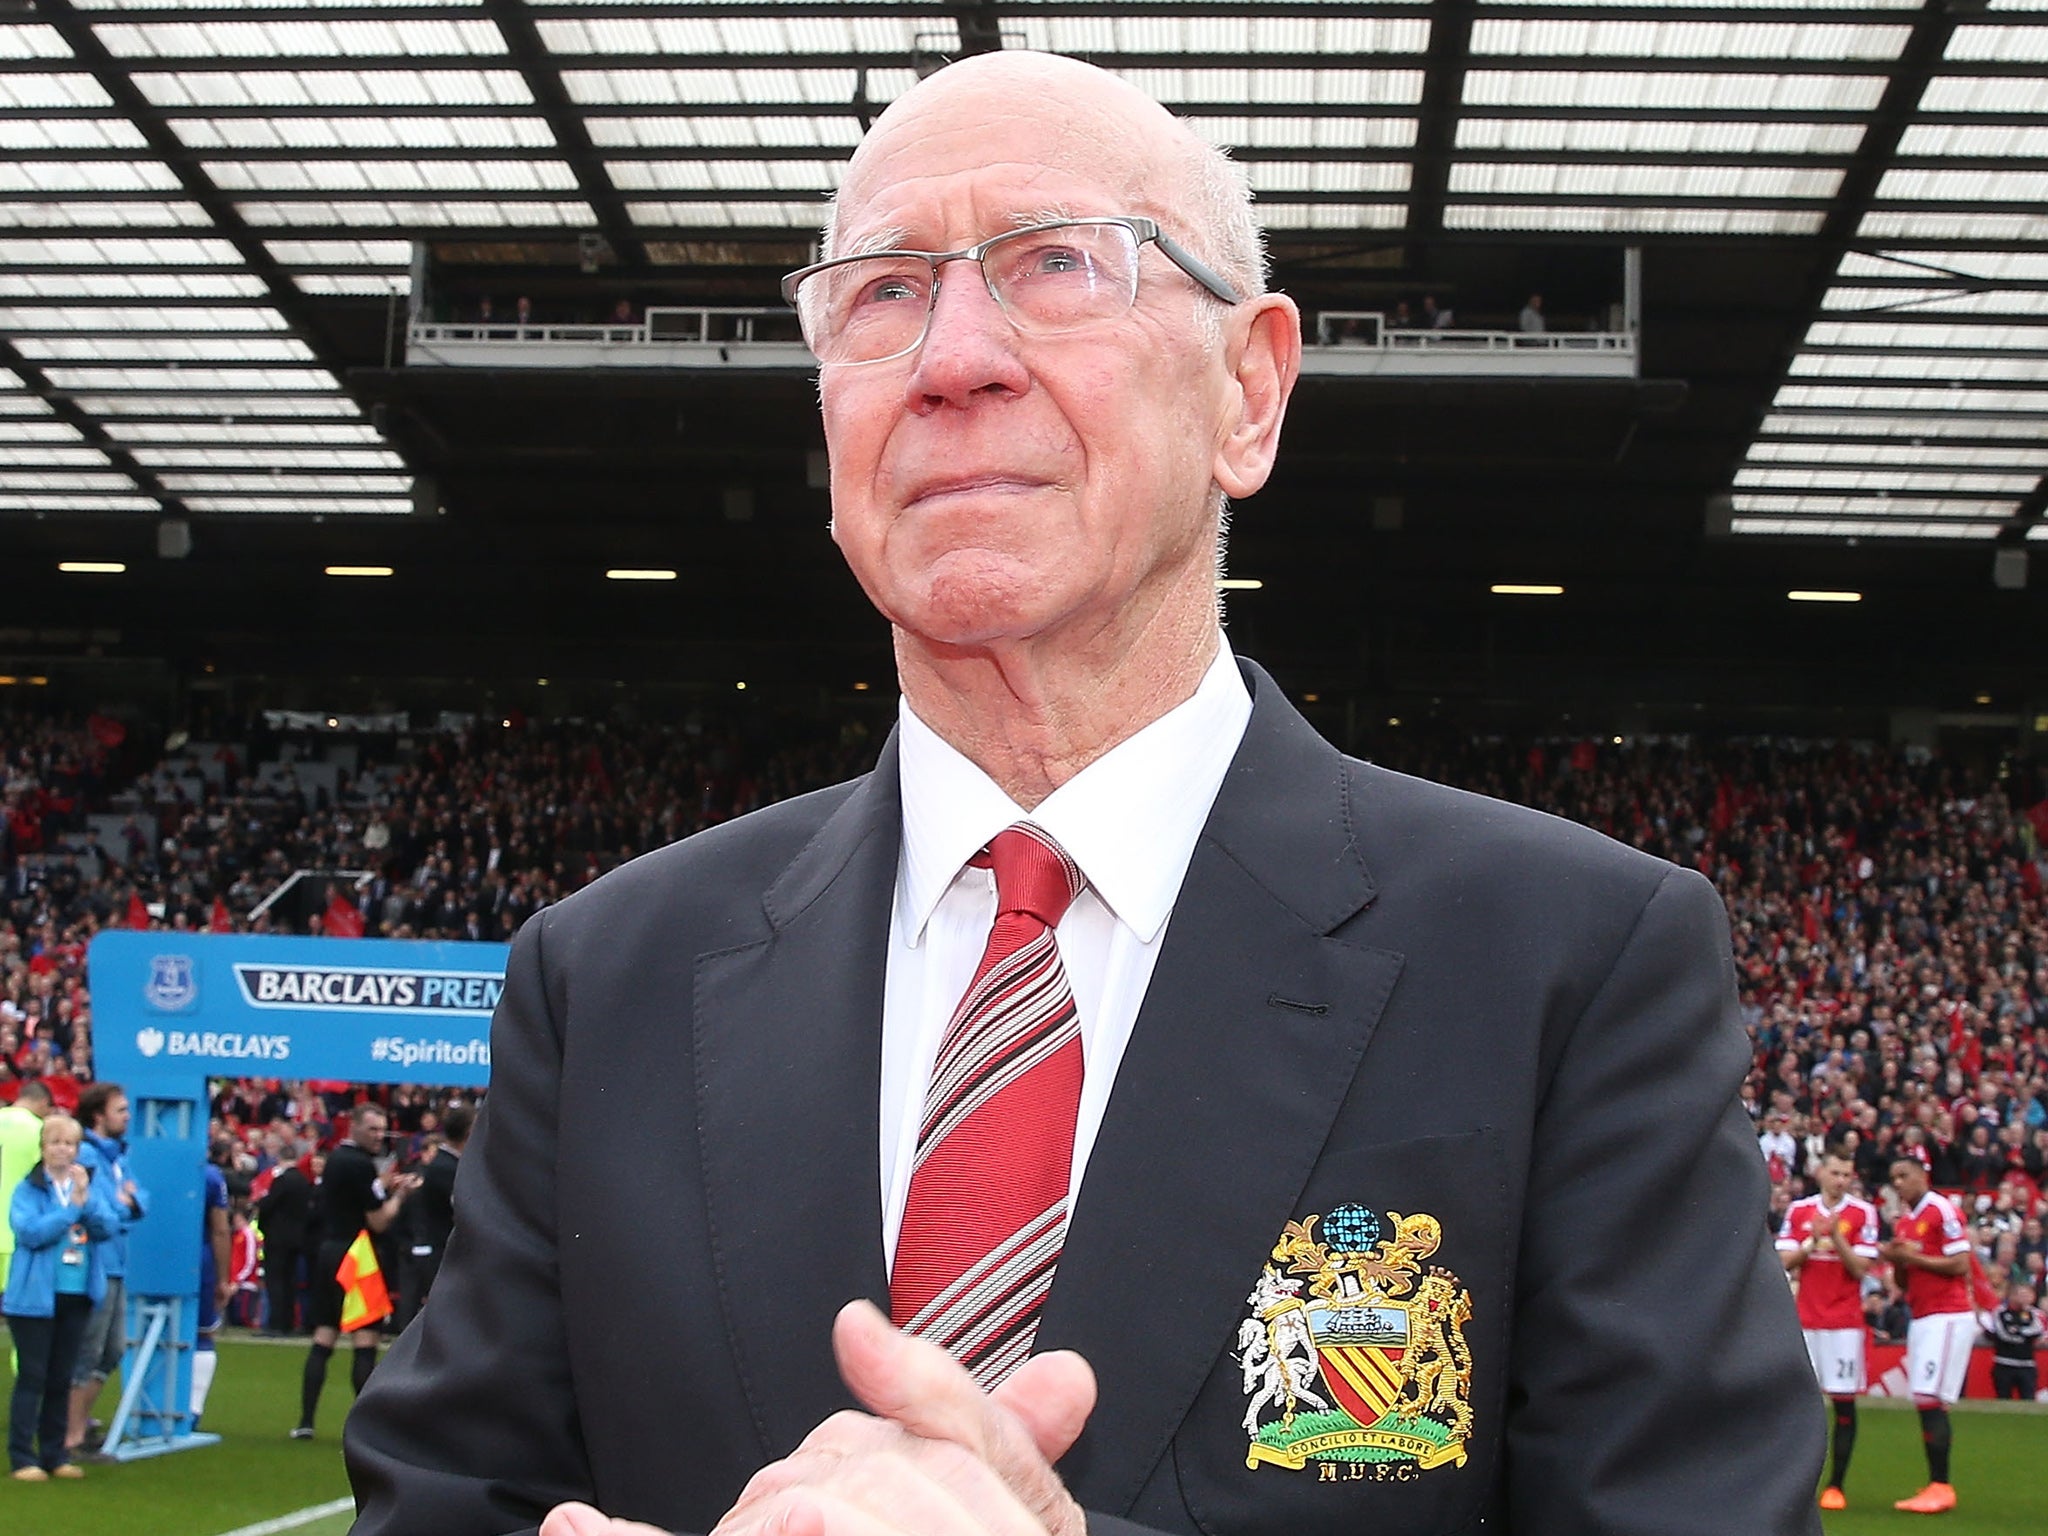 Sir Bobby Charlton is an untouchable legend at Manchester United